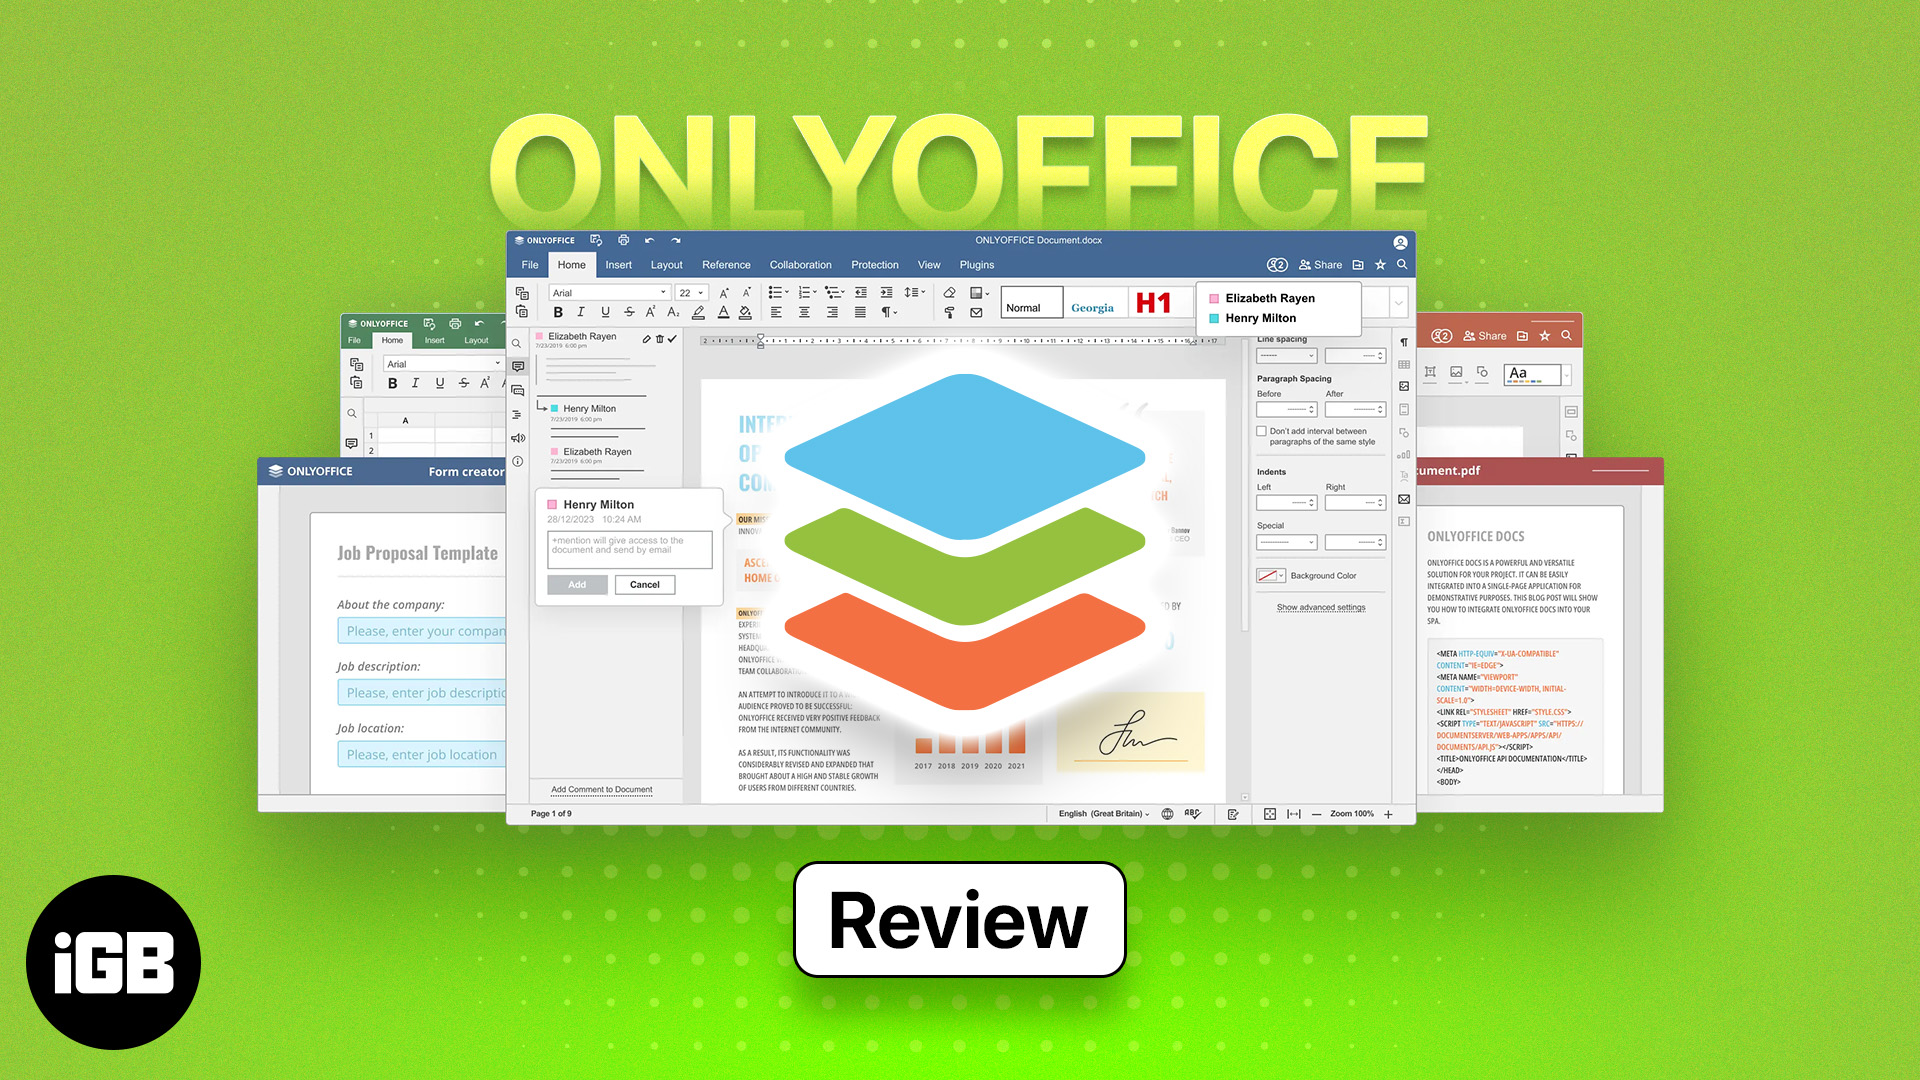 OnlyOffice Desktop Editor – Edit, create, and manage documents on Mac